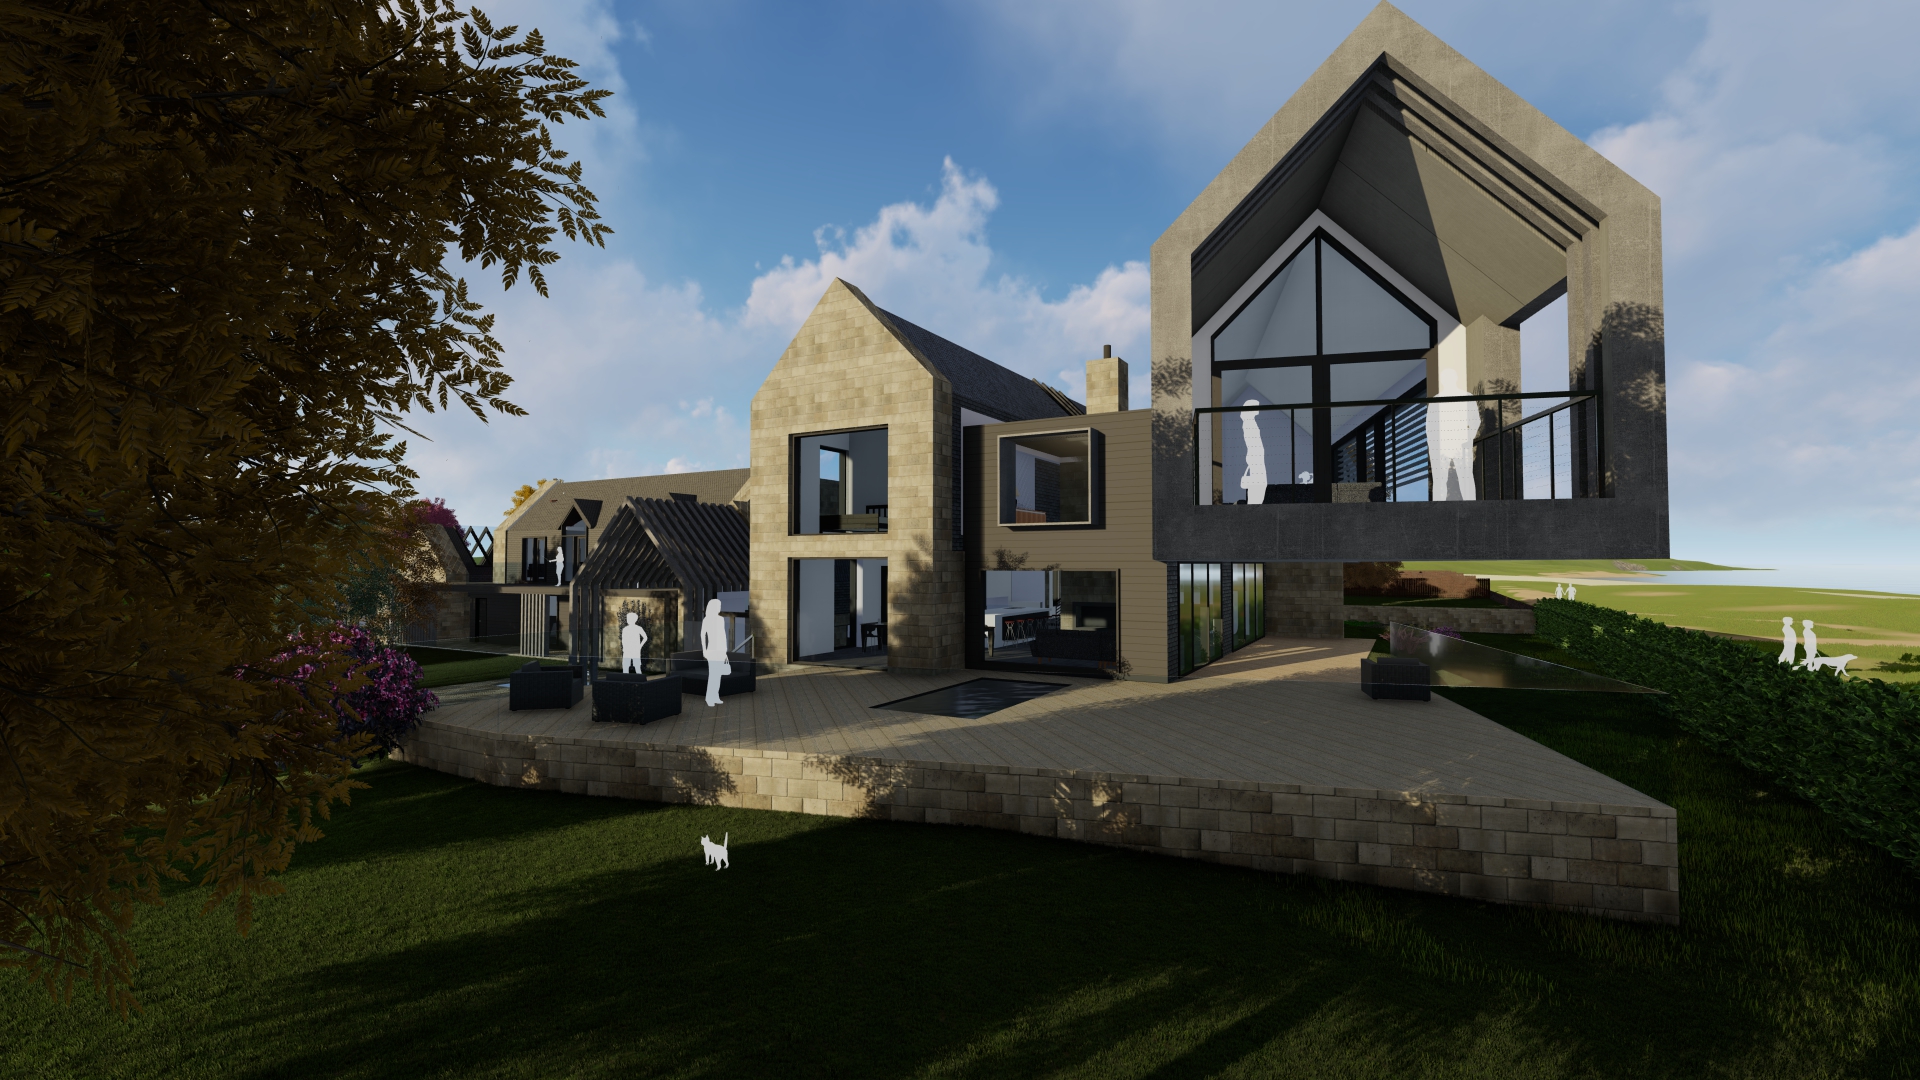 Brunton Design wins planning permission for Angus country home